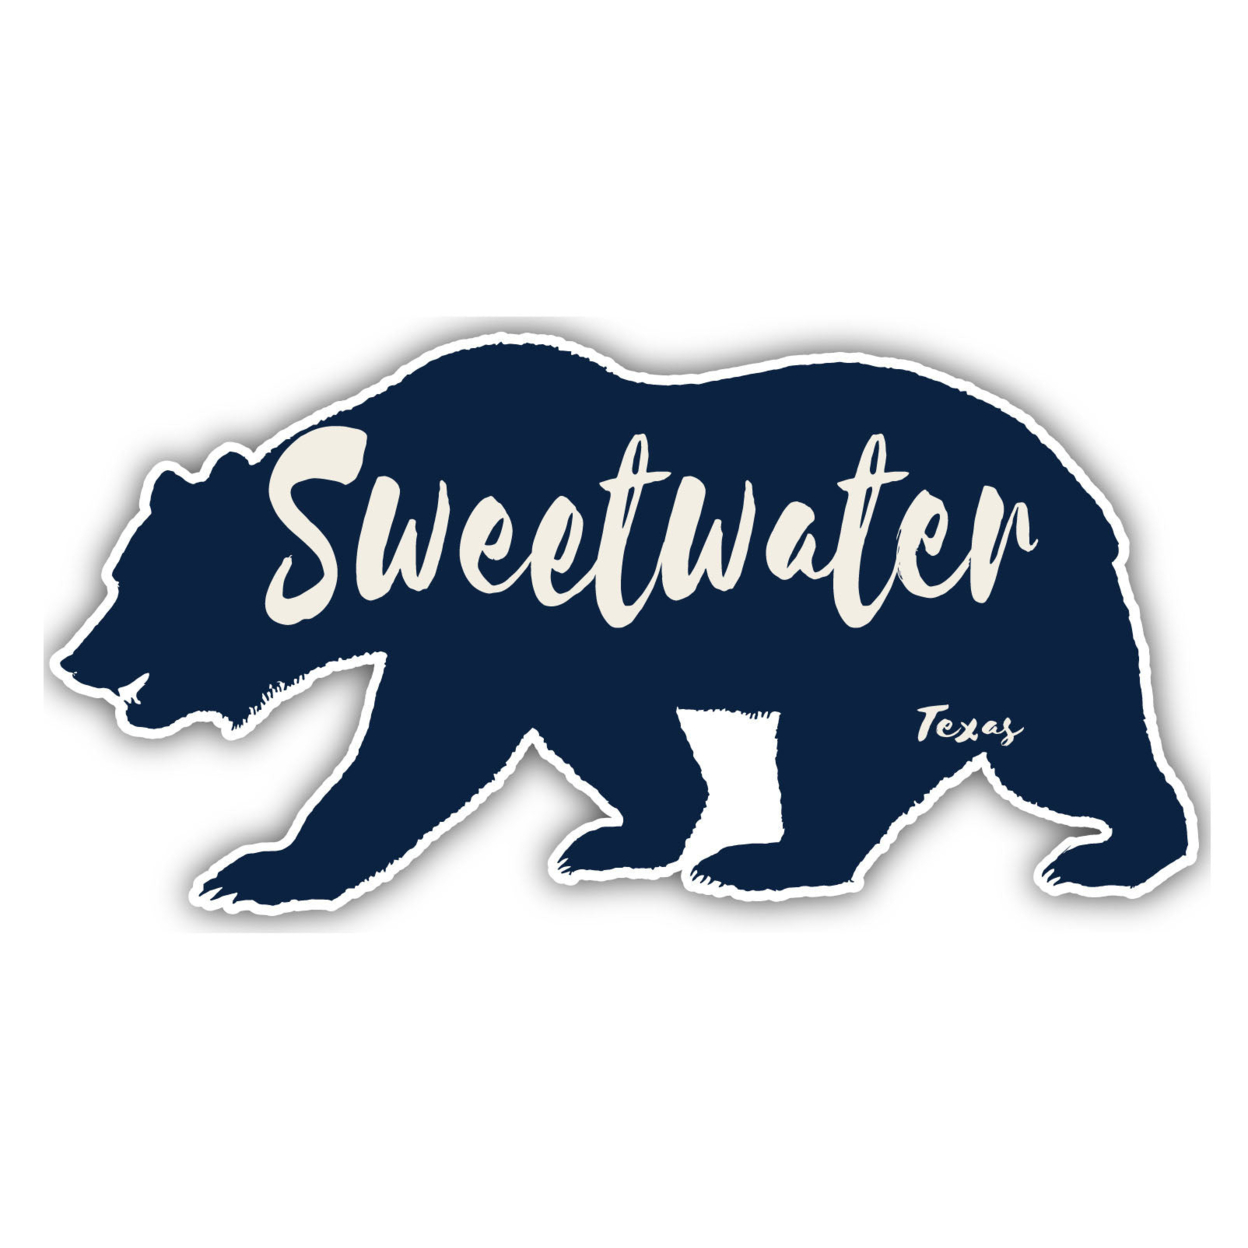 Sweetwater Texas Souvenir Decorative Stickers (Choose Theme And Size) - Single Unit, 2-Inch, Tent